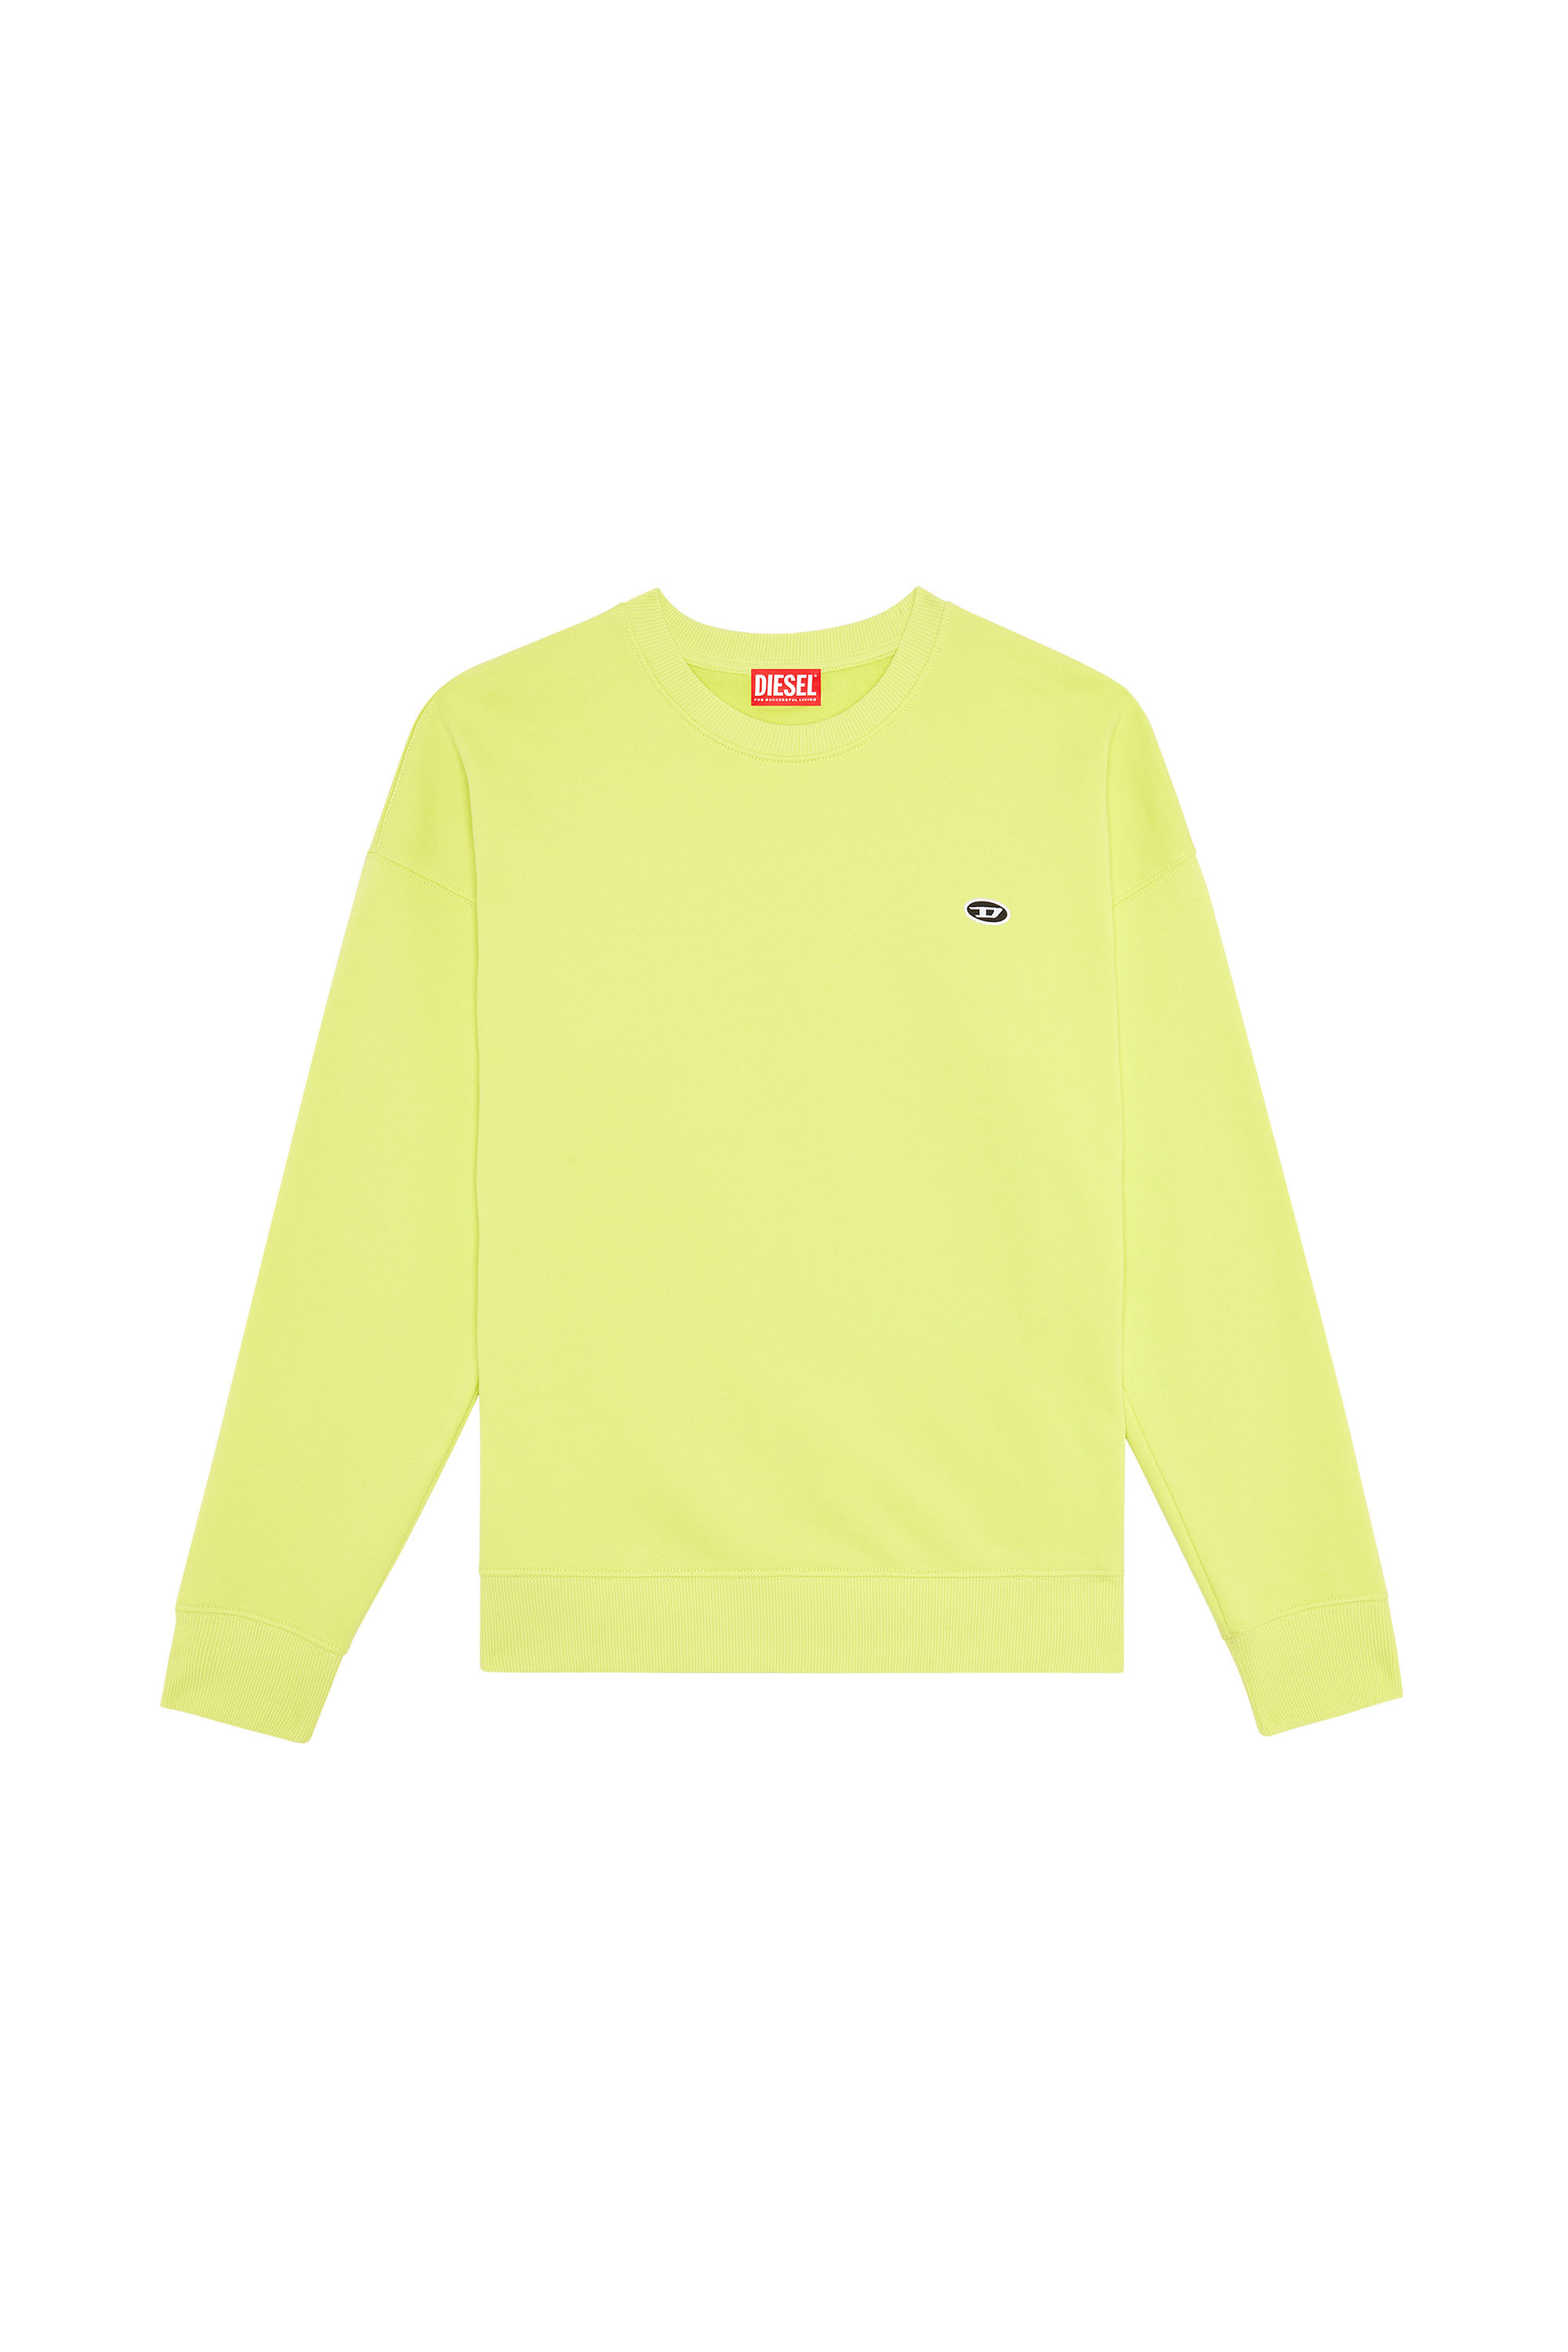 Diesel - S-ROB-DOVAL-PJ, Yellow Fluo - Image 3